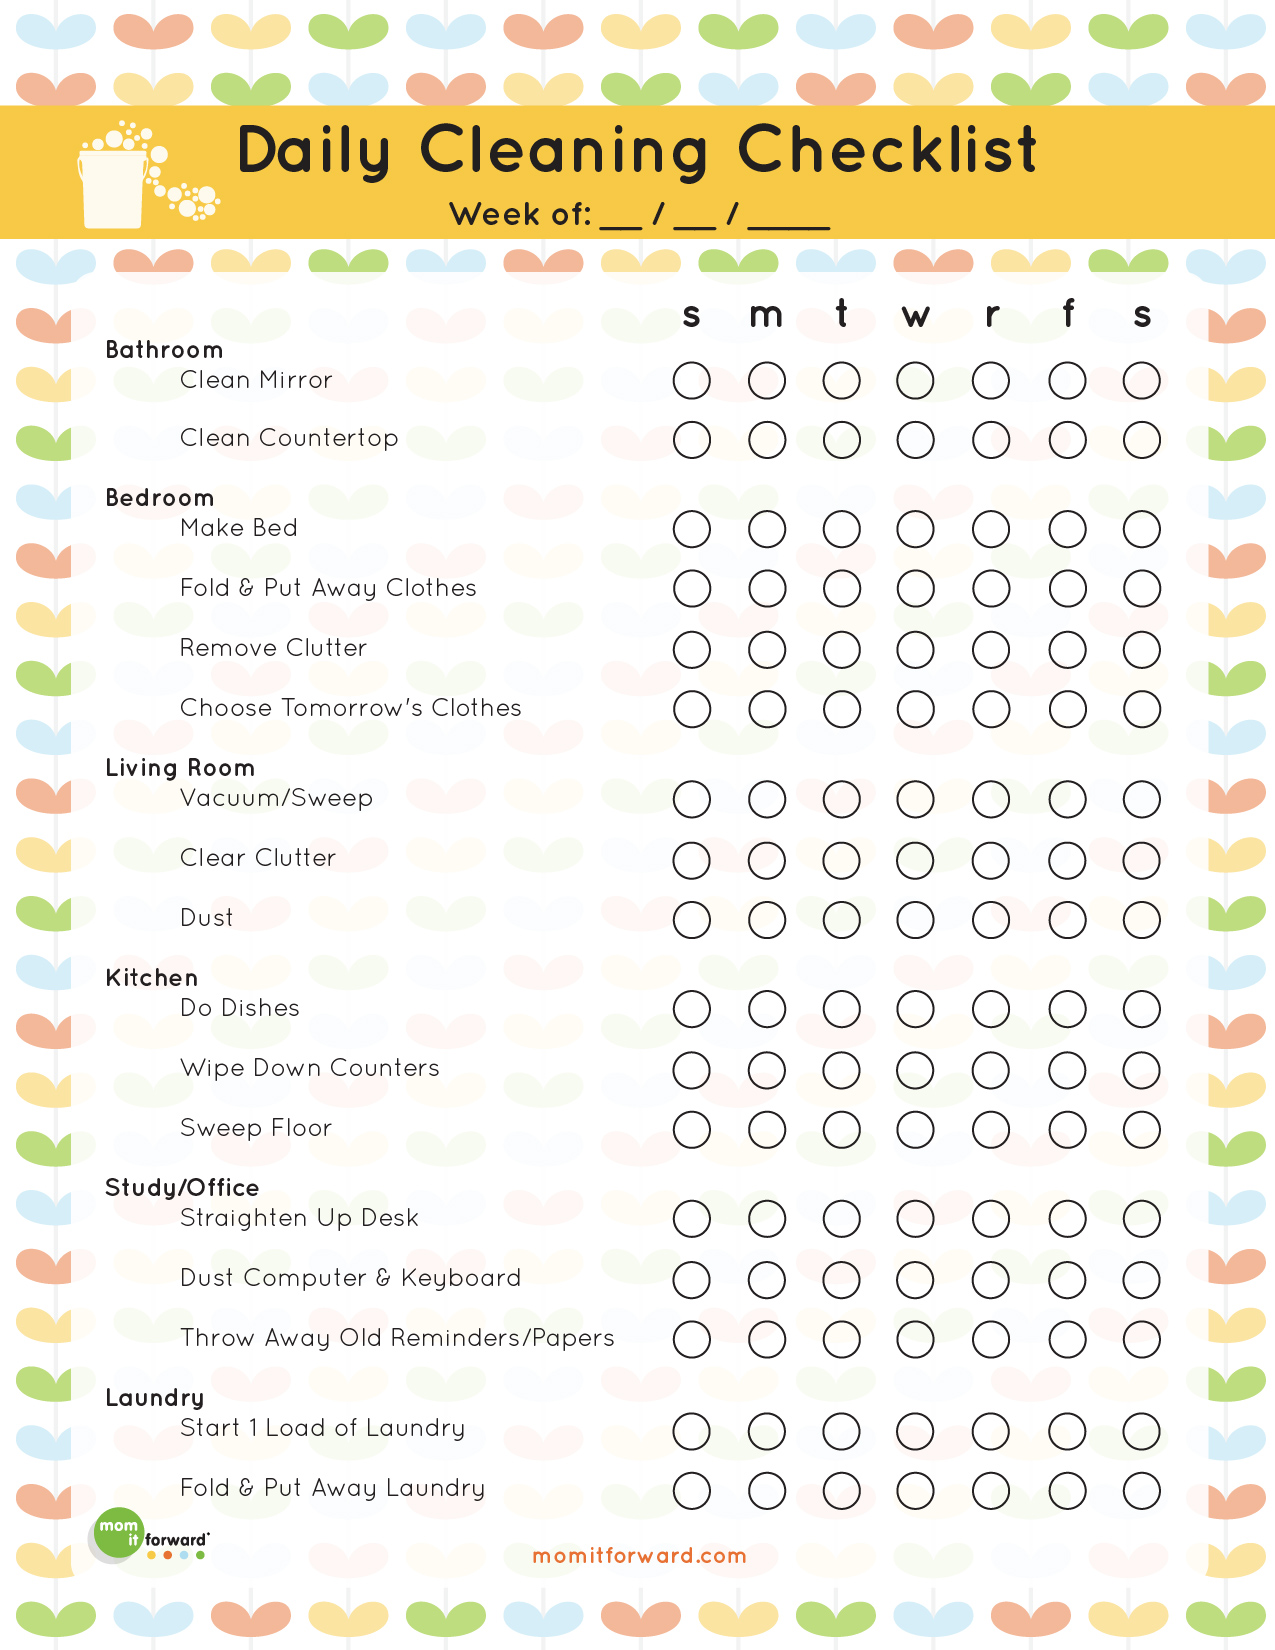 commercial-office-cleaning-checklist-template-word-excel-templates